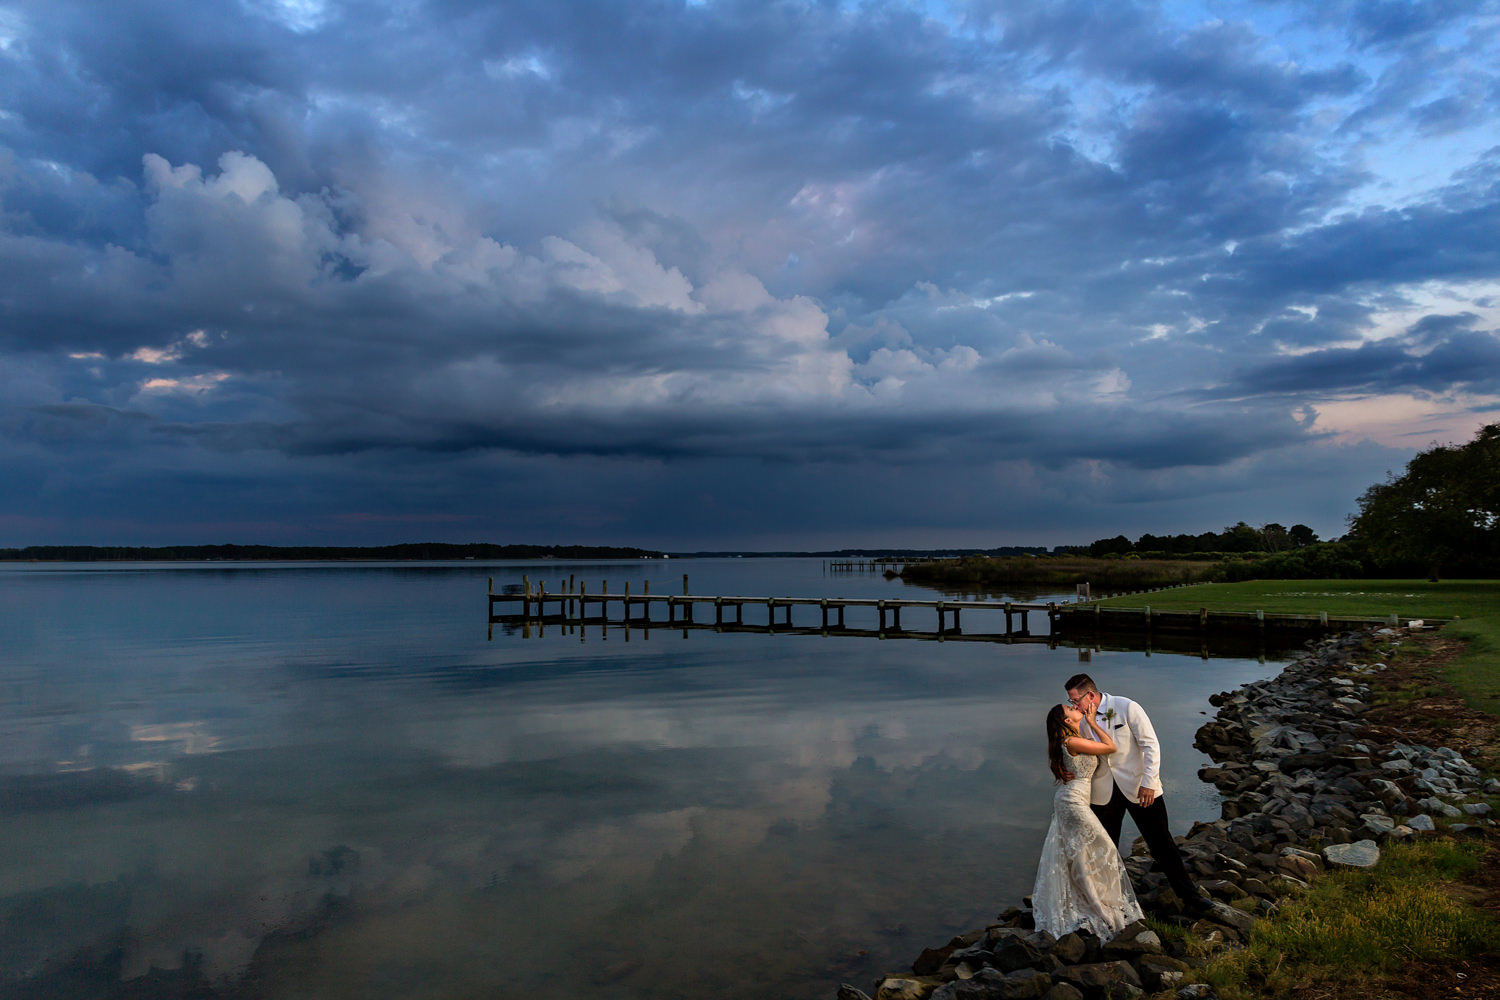 Swan Cove Manor, This eastern Shore wedding was lots of fun, the bride and groom came out from their reception to do a sunset shot with me, we caught the last bit of light as dusk was setting in, they were standing at the edge of the water and you can see the clouds and the reflection of the clouds in the water, it is dark blue in the sky and in the water, she reaches in to steal a kiss, they are standing on the rocks, Procopio Photography, best top Washington DC photographer, best top Maryland photographer, best top Virginia photographer, best top DMV photographer, best top wedding photographer, best top commercial photographer, best top portrait photographer, best top boudoir photographer, modern fine art portraits, dramatic, unique, different, bold, editorial, photojournalism, award winning photographer, published photographer, memorable images, be different, stand out